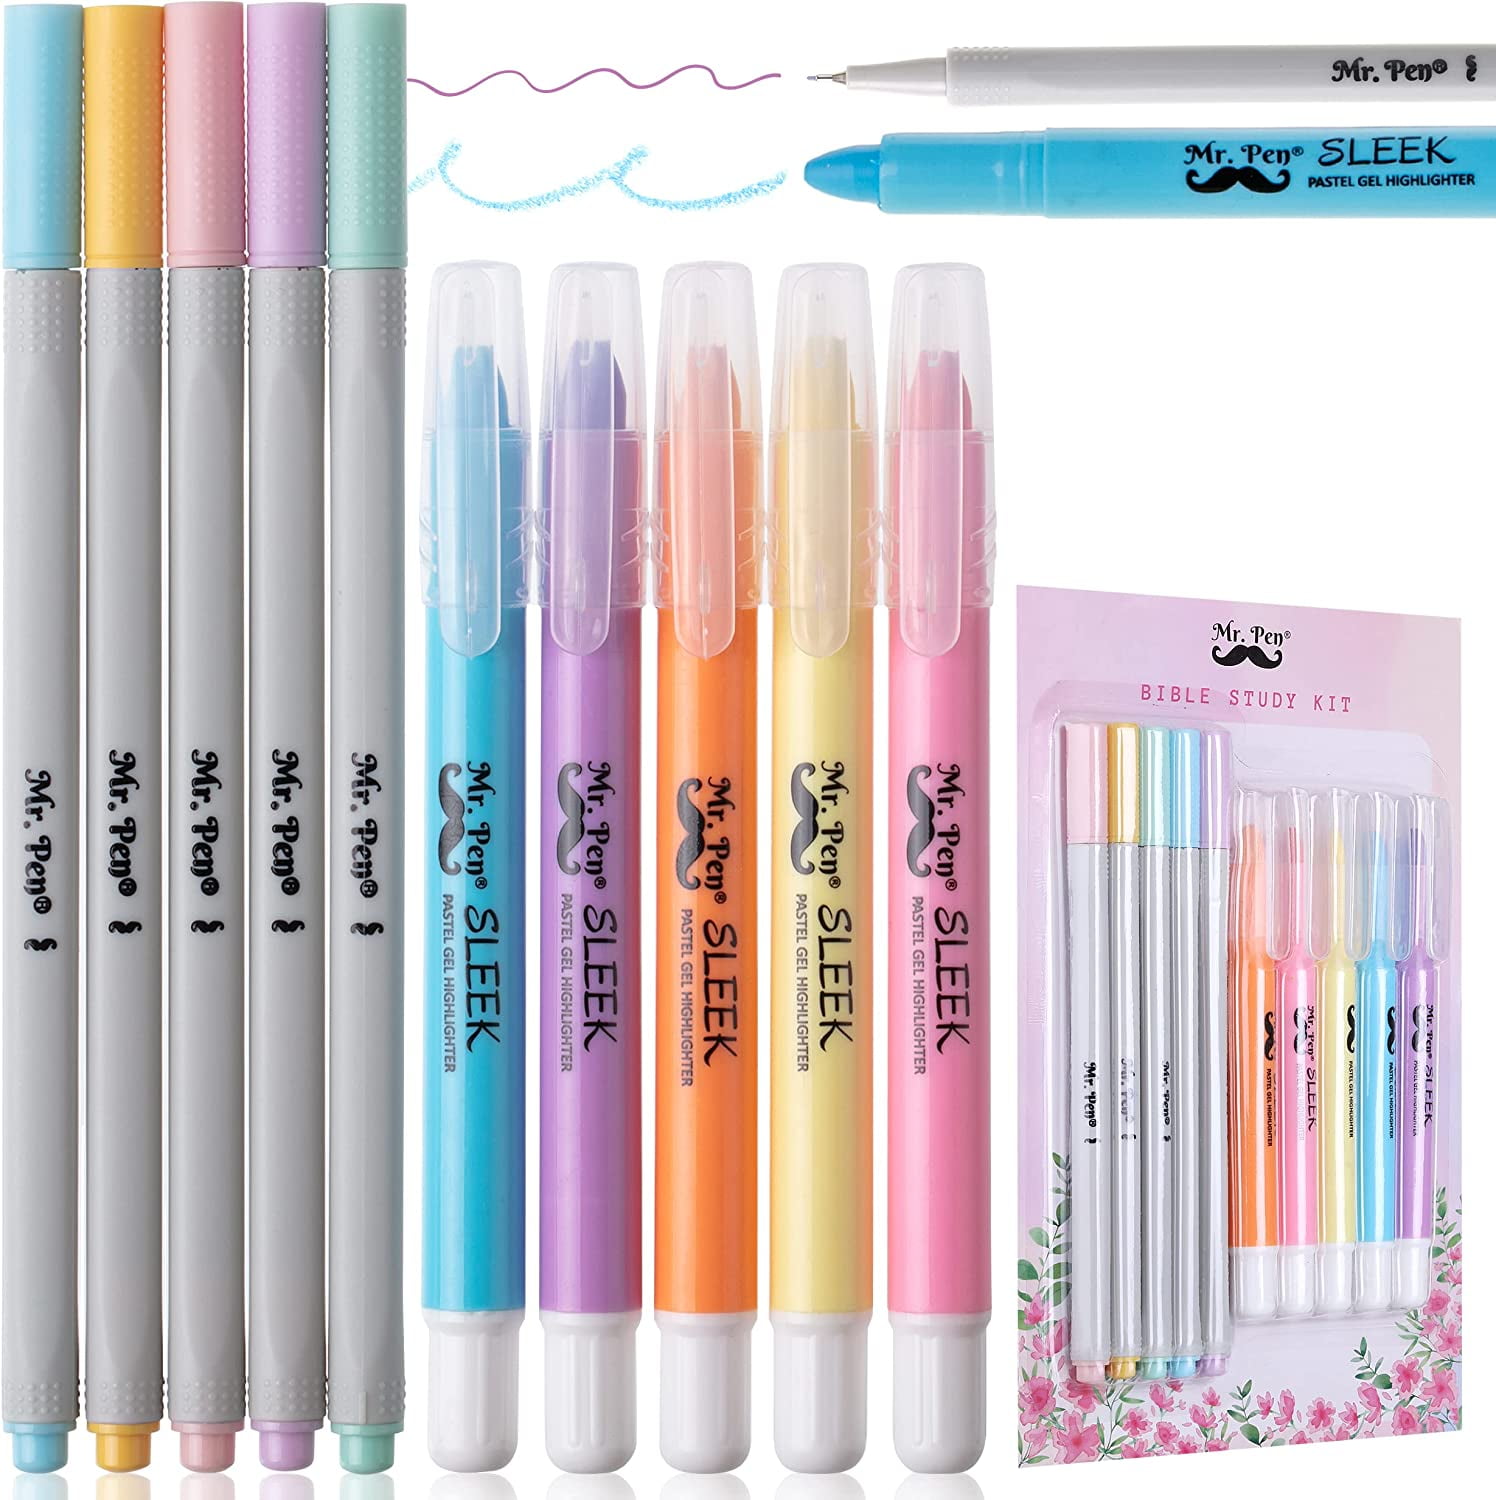 BLIEVE- Bible Highlighters And Pens No Bleed Through, Bible Verse